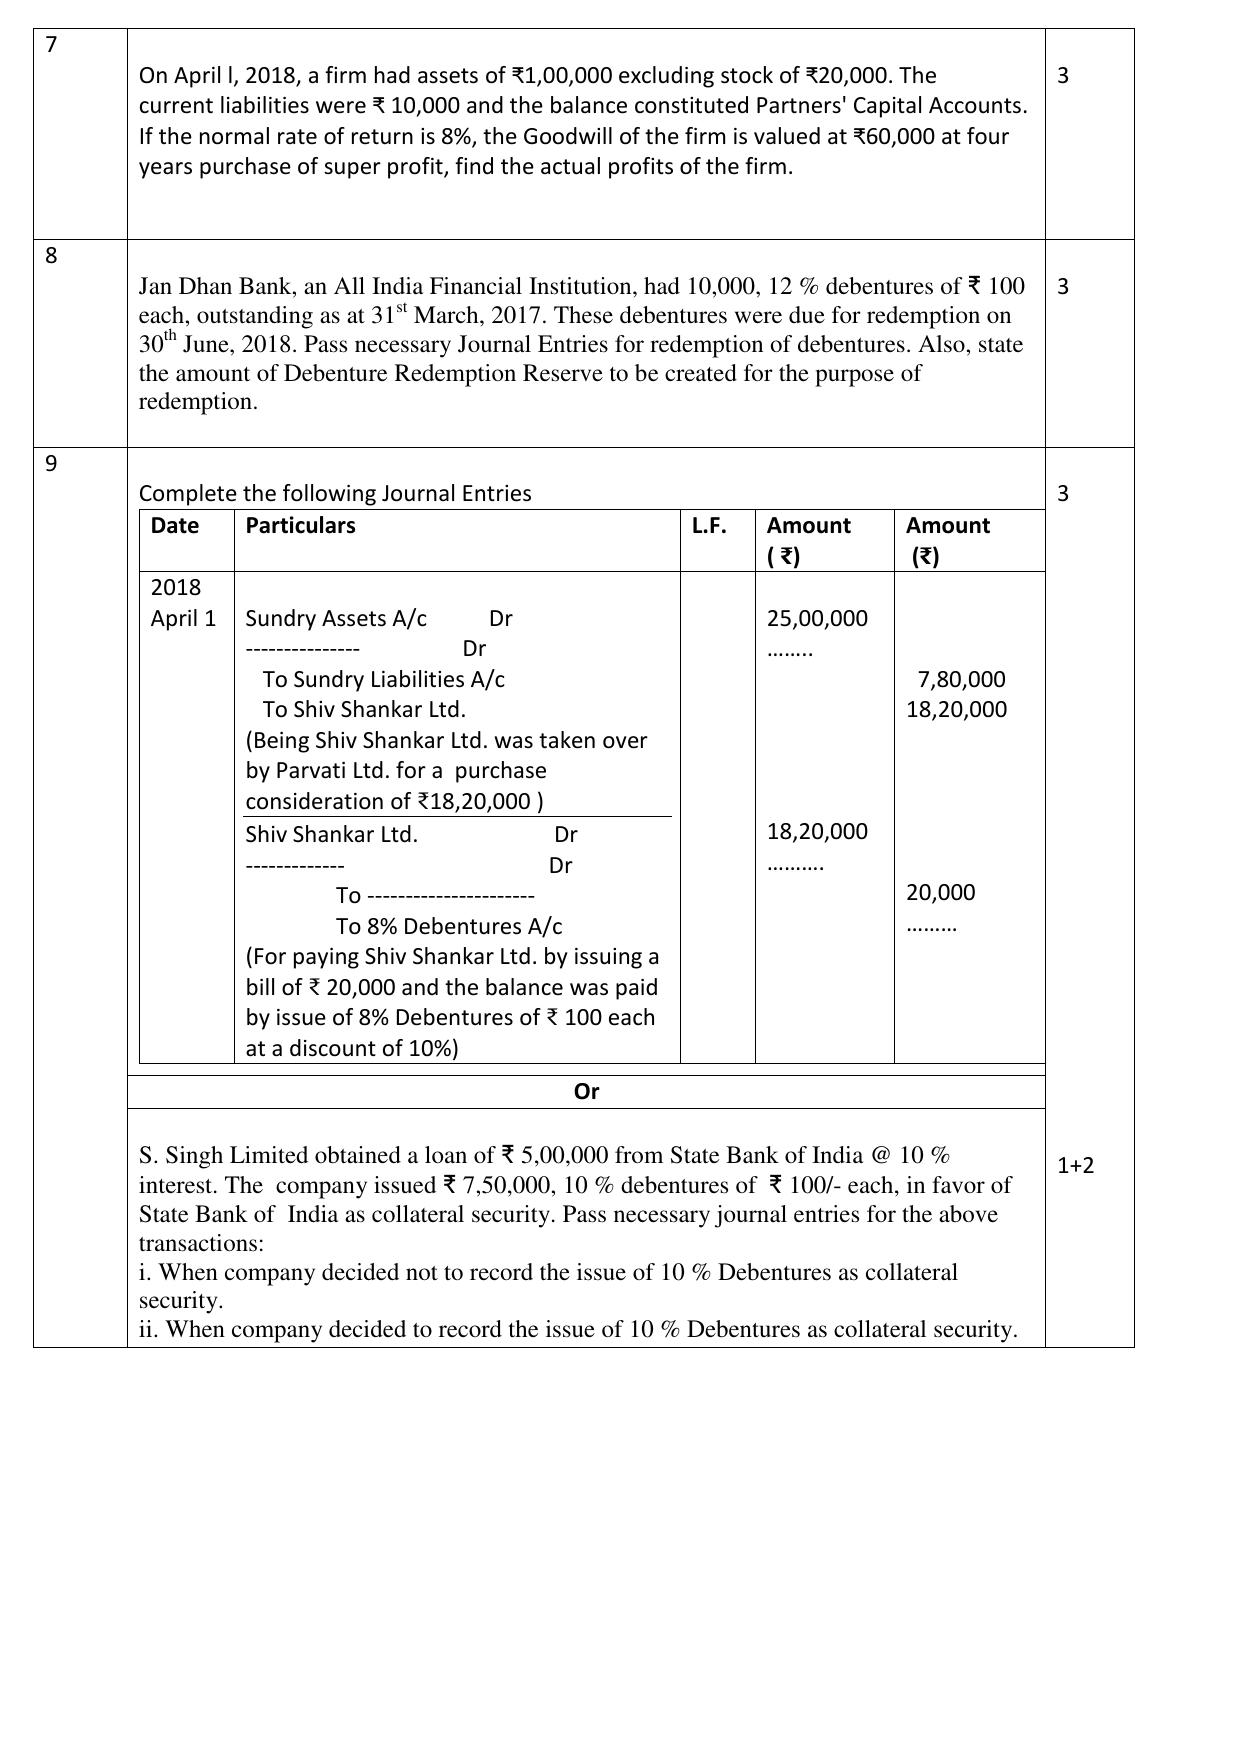 CBSE Class 12 Accountancy-Sample Paper 2018-19 - Page 2